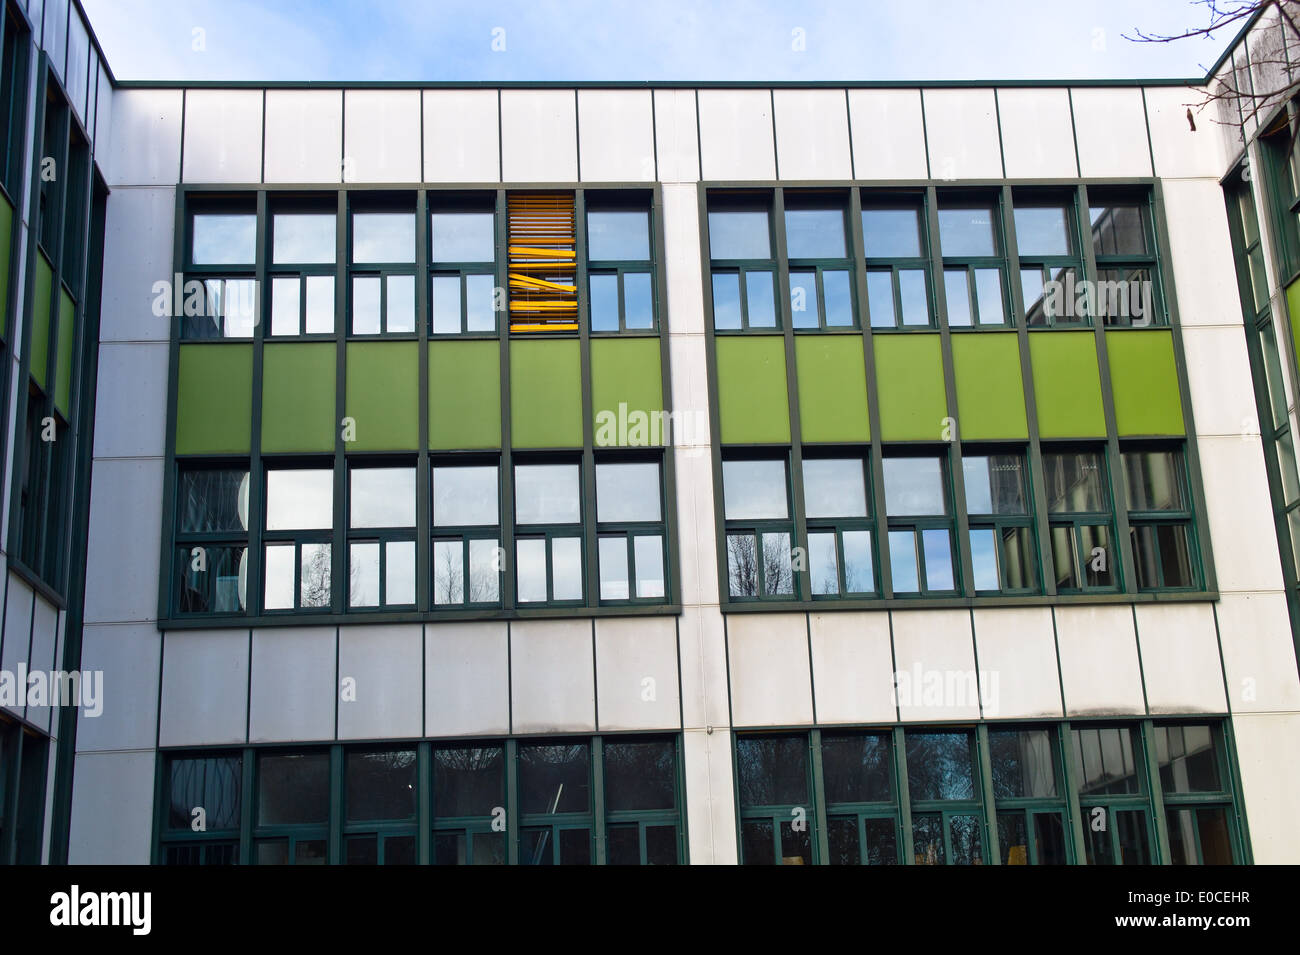 The building of a school from the outside takes photos. A window a Venetian blind, Das gebaeude einer Schule von aussen fotograf Stock Photo